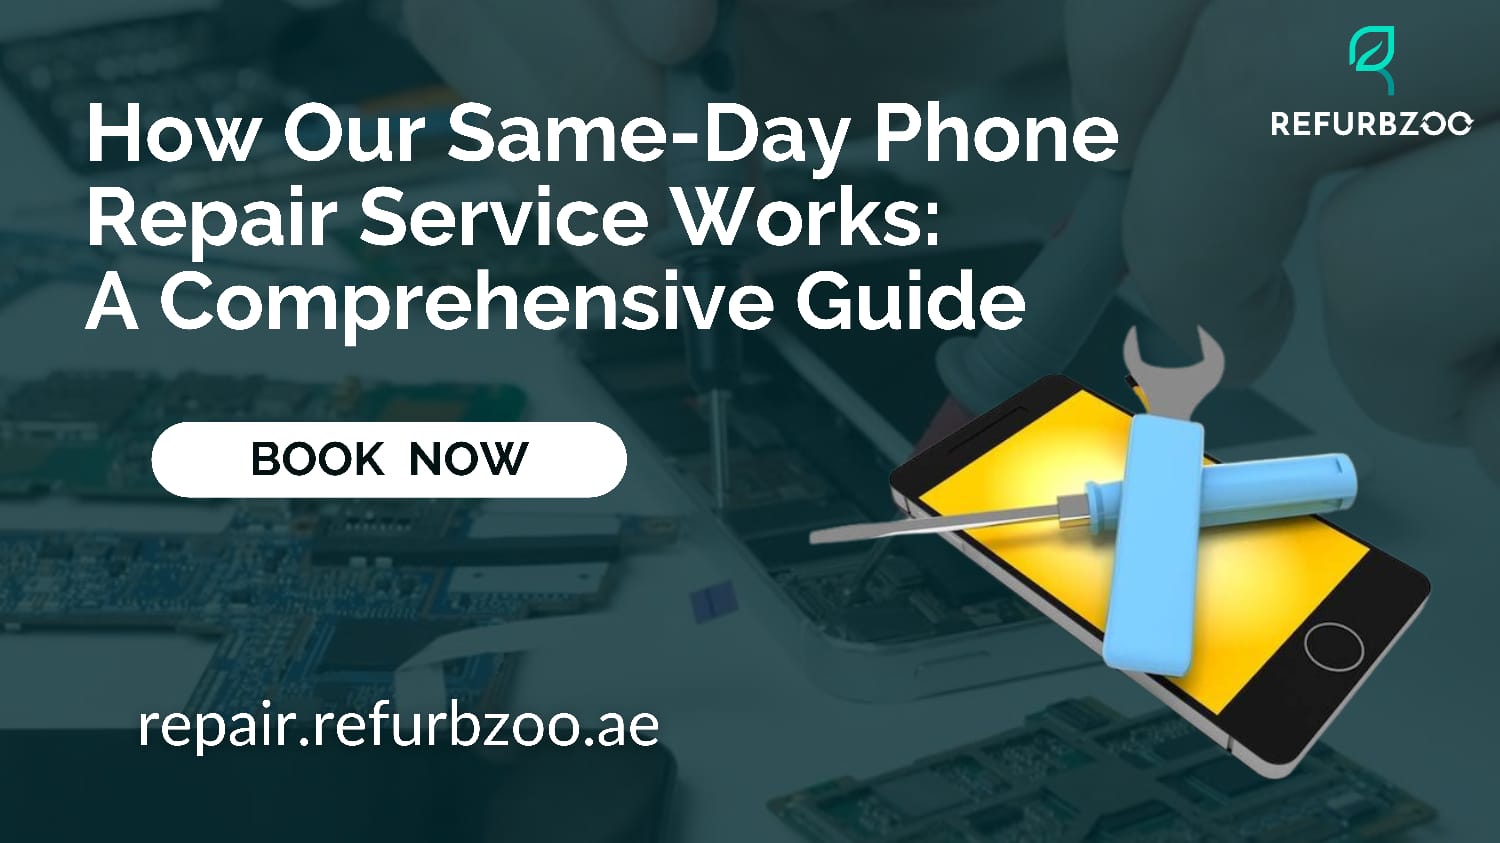 How Our Same-Day Phone Repair Service Works: A Comprehensive Guide